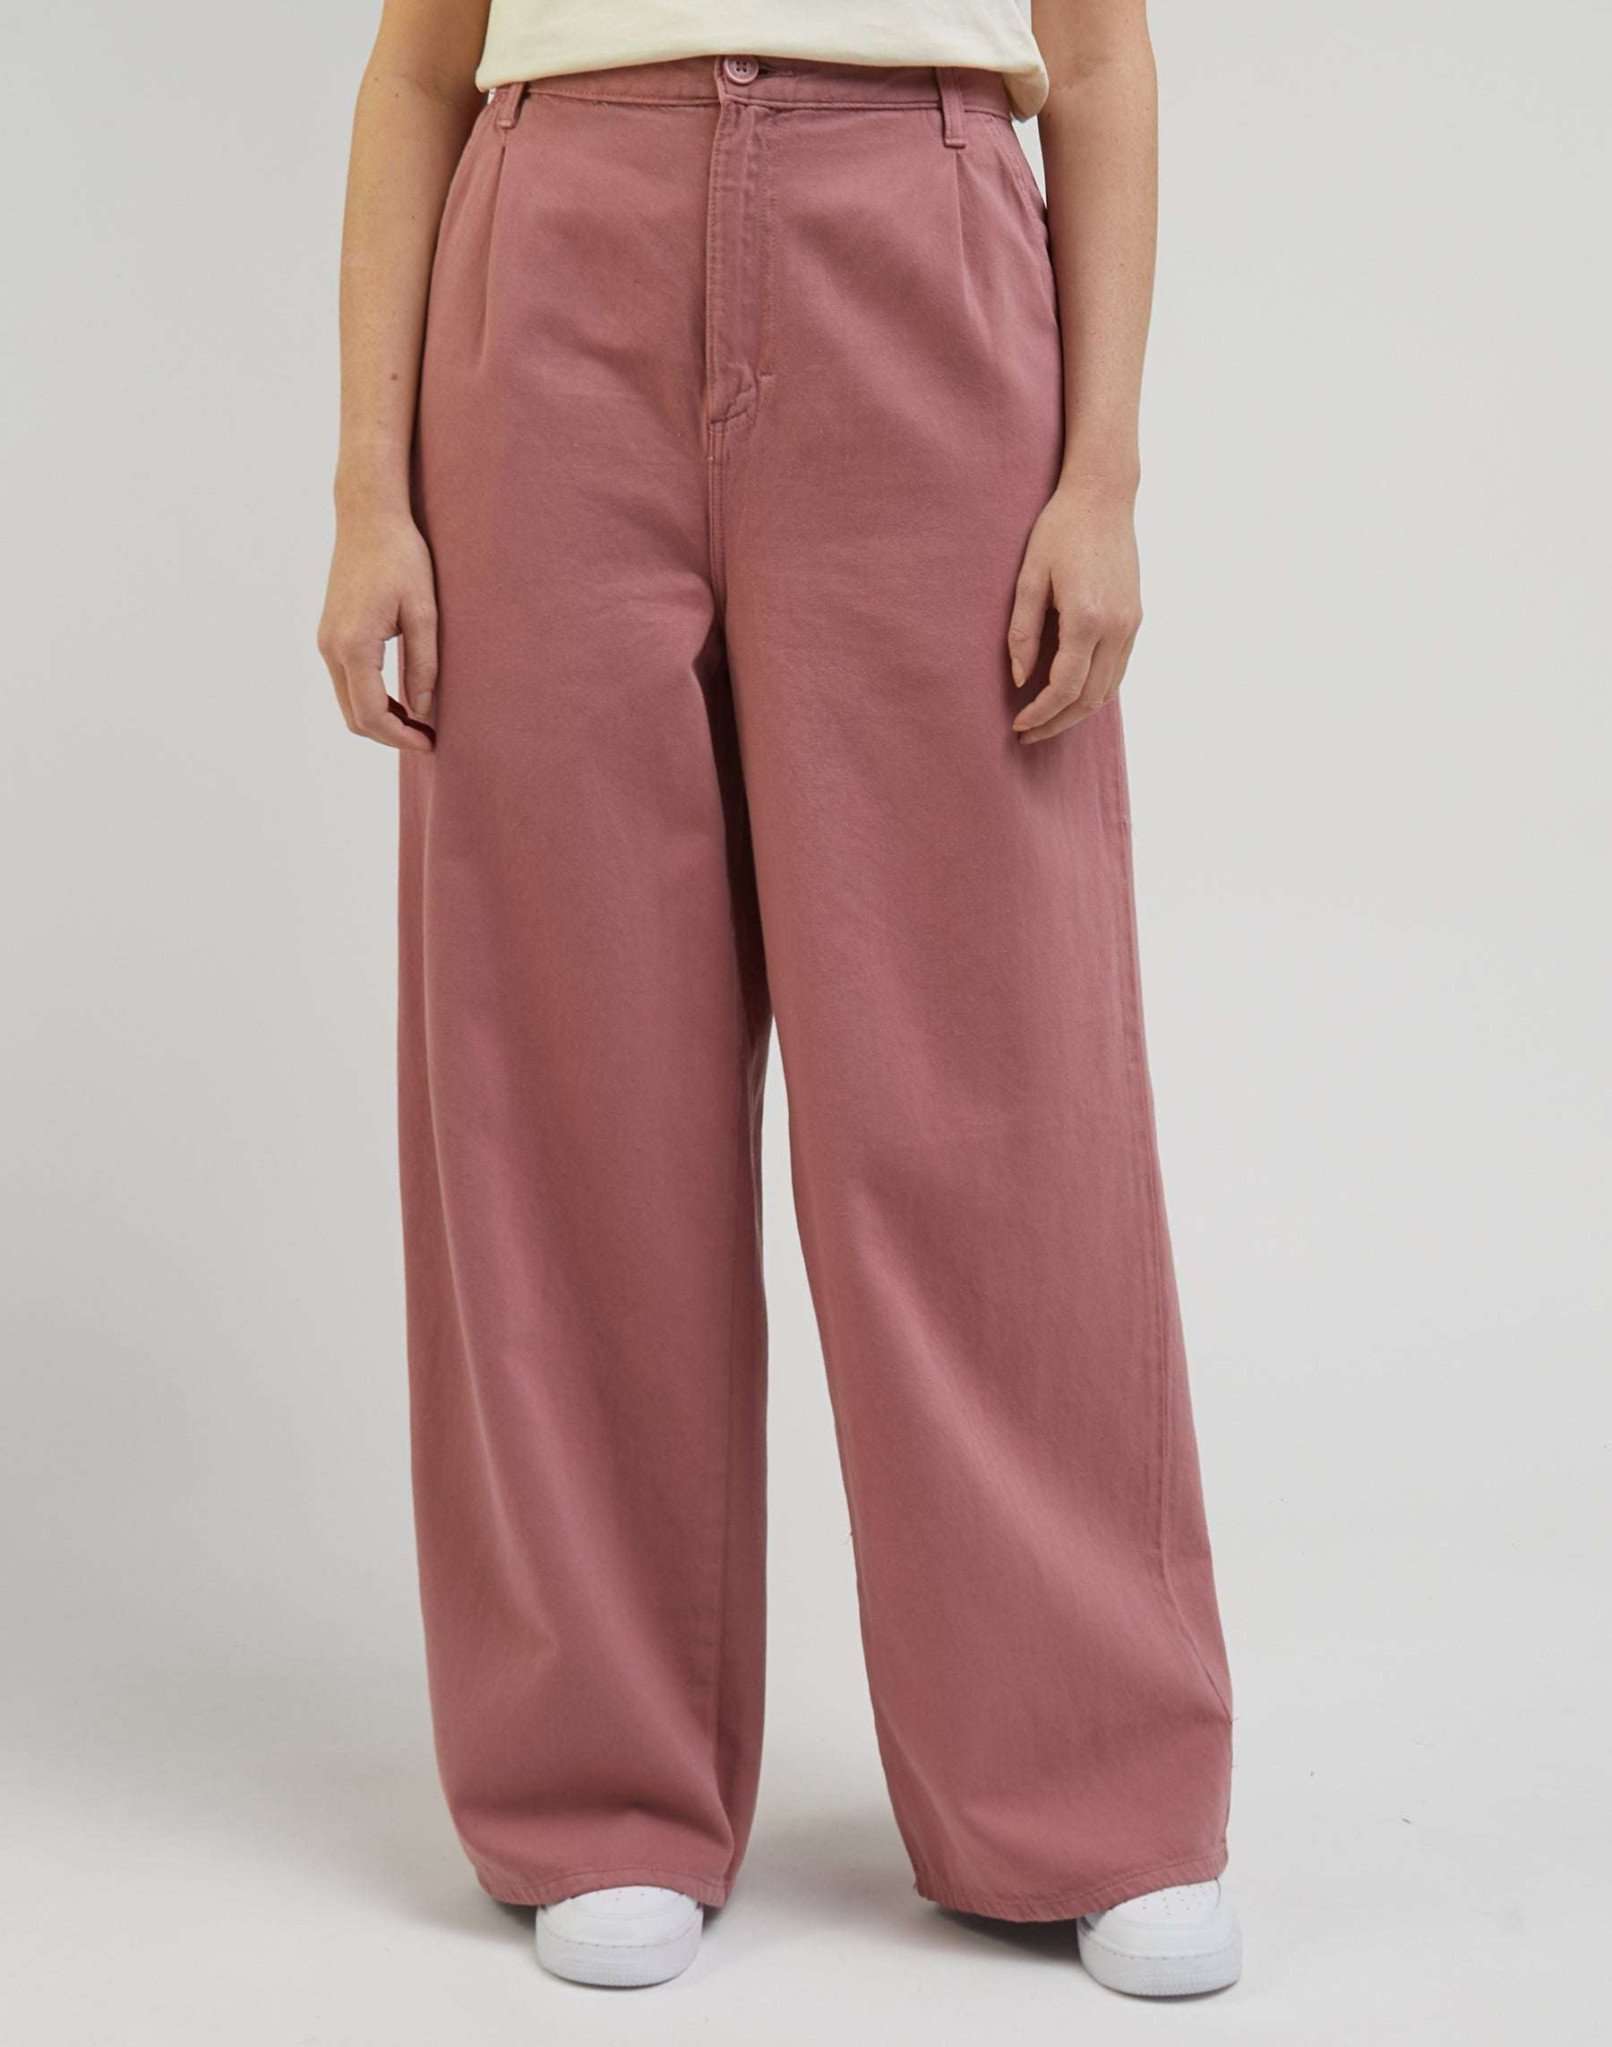 Relaxed Chino in Dark Mauve Hosen Lee   